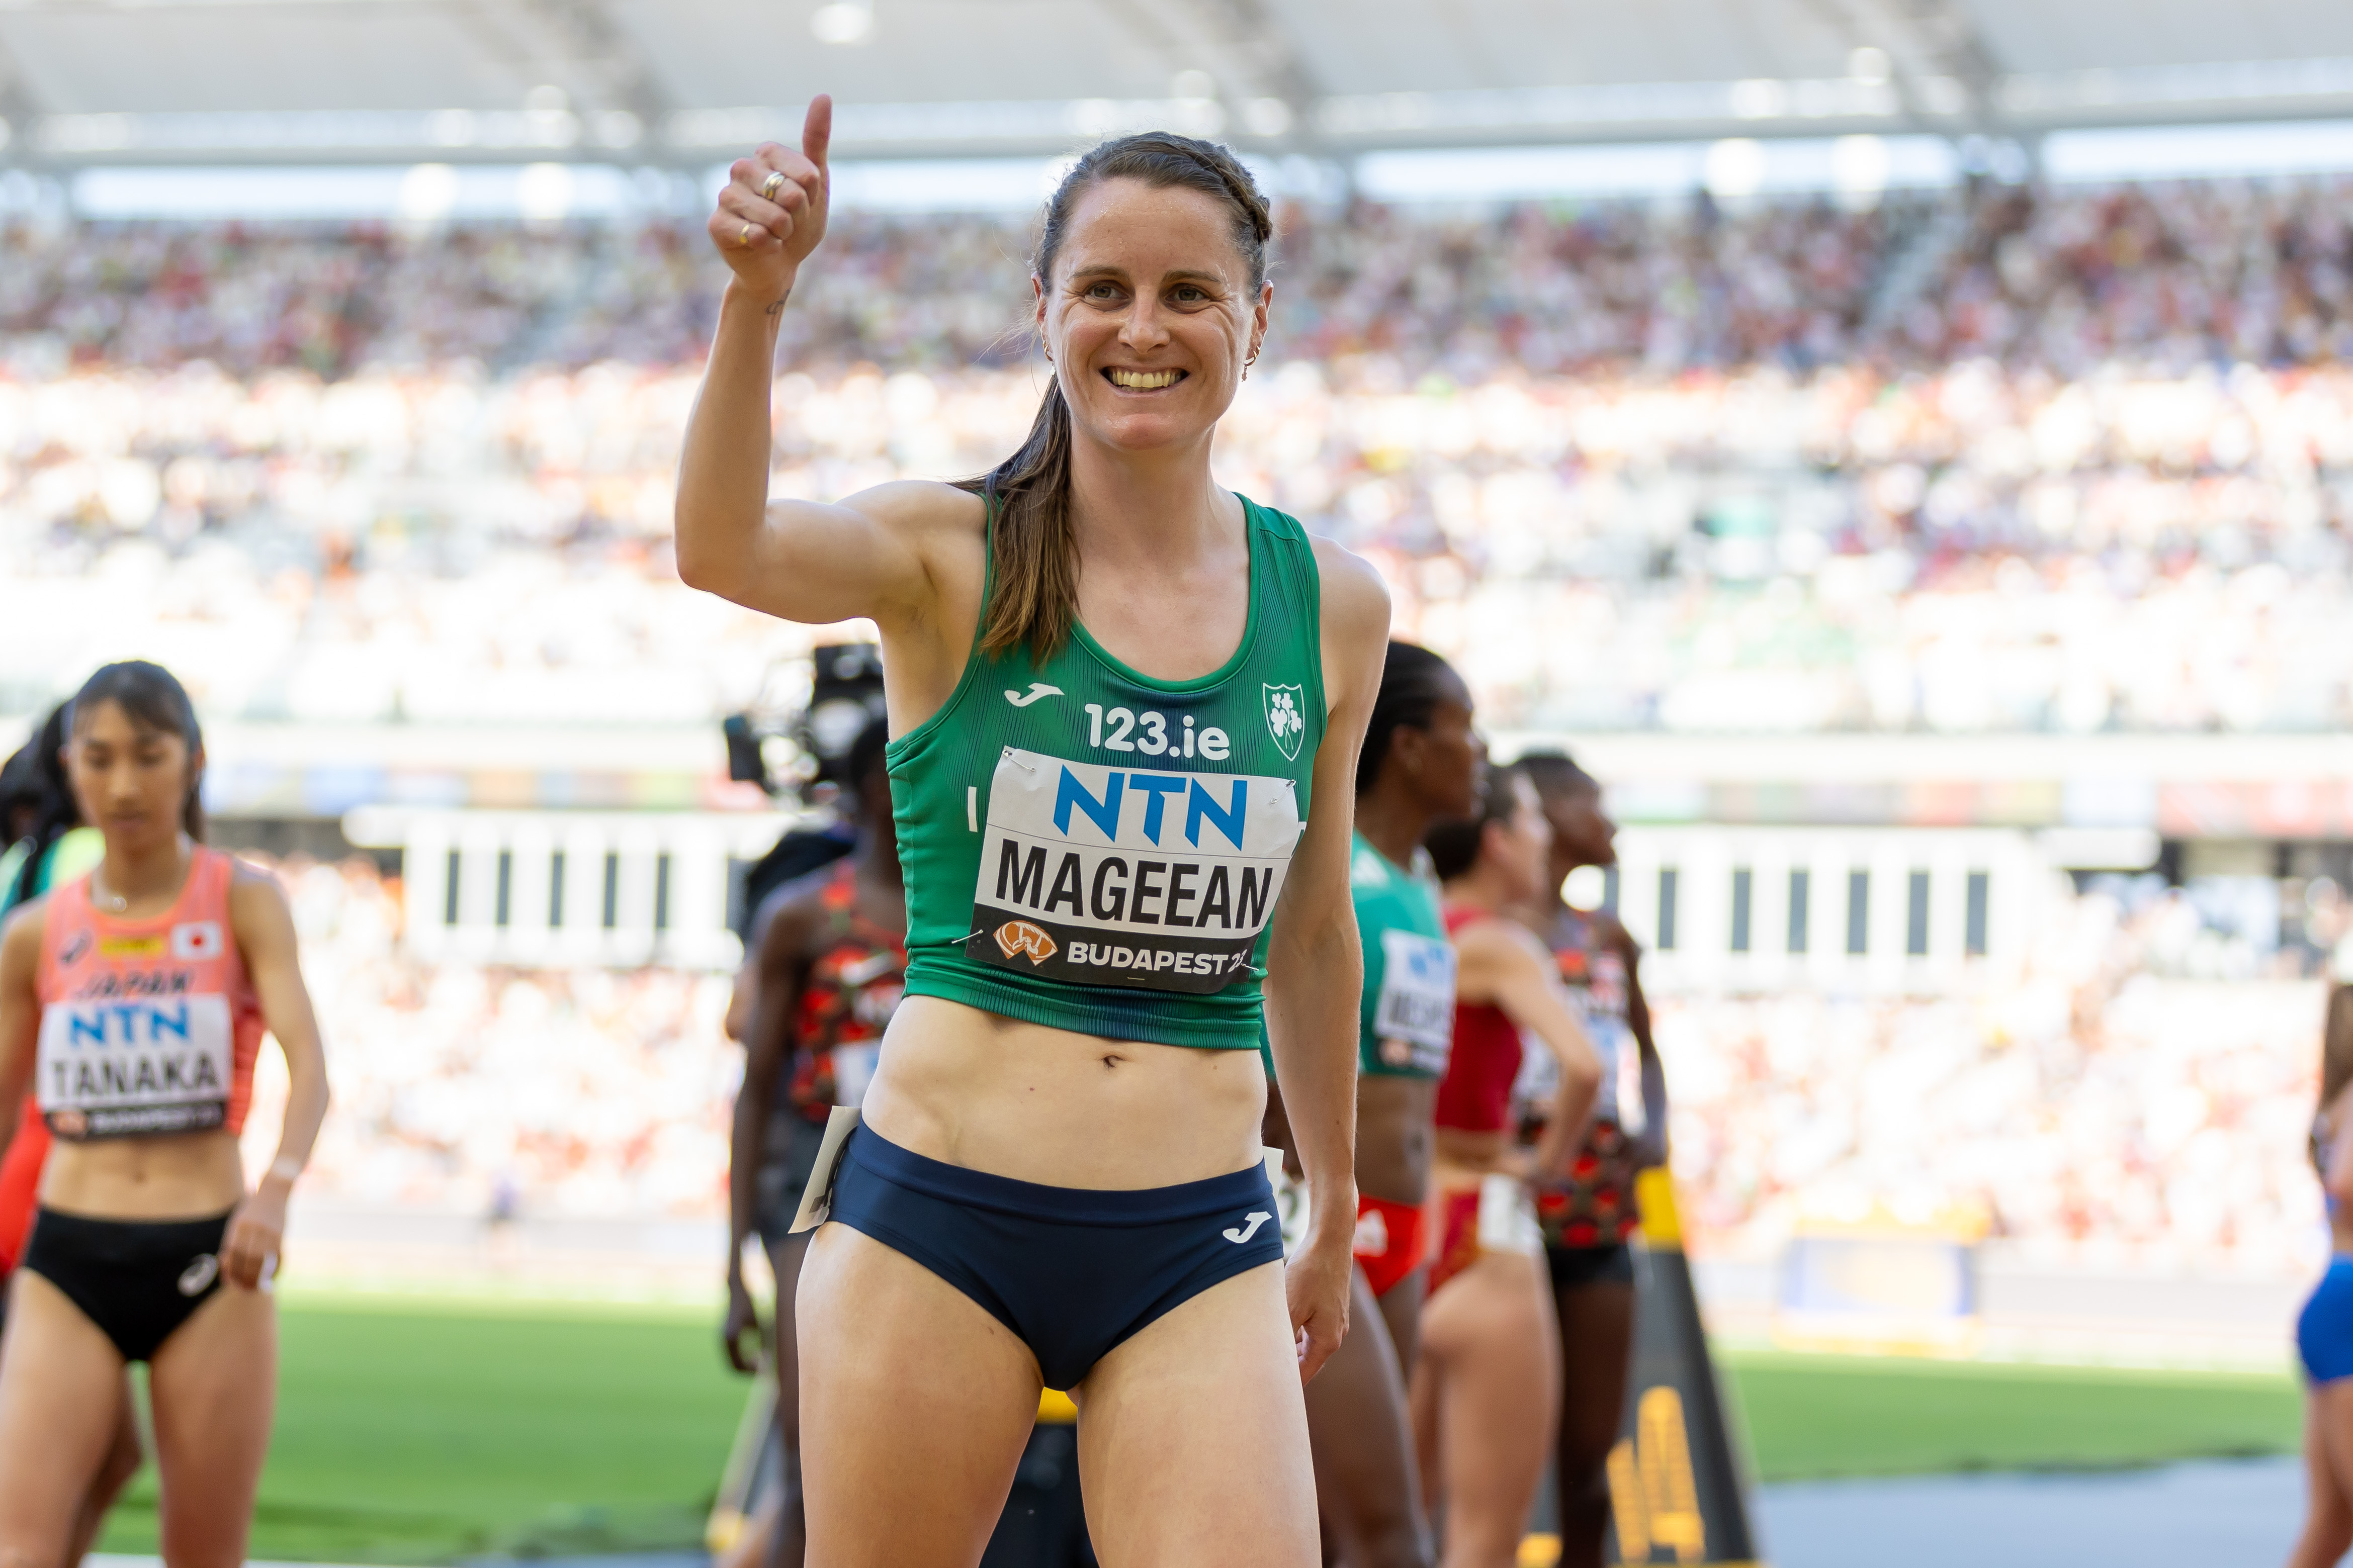 Ciara Mageean primed for 1,500m showdown of her life – The Irish Times